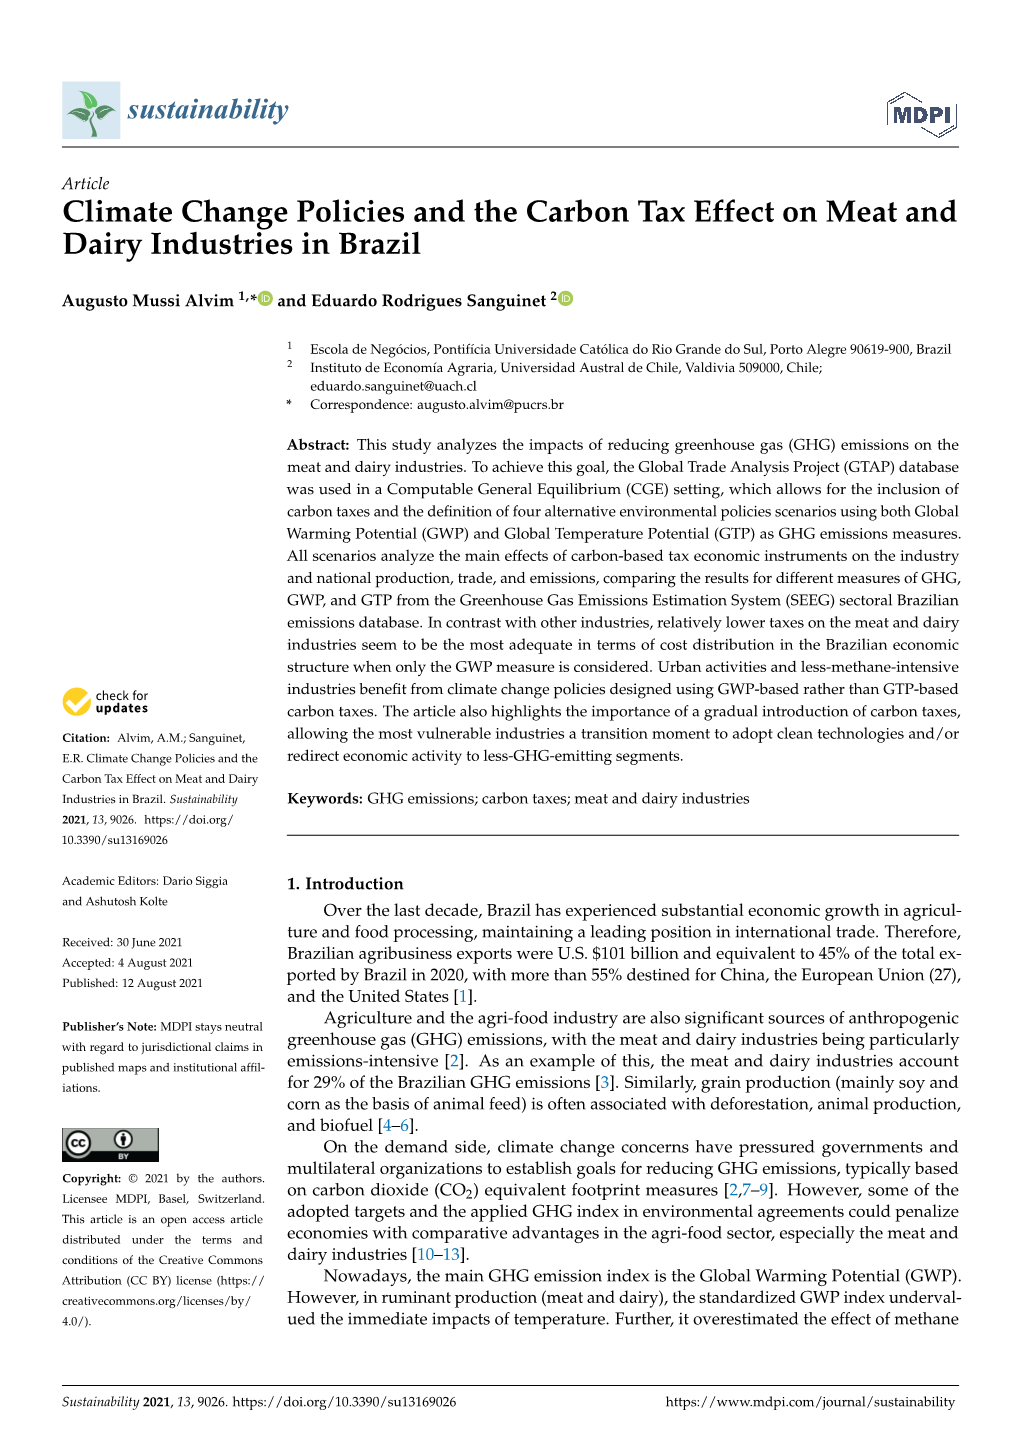 Climate Change Policies and the Carbon Tax Effect on Meat and Dairy Industries in Brazil